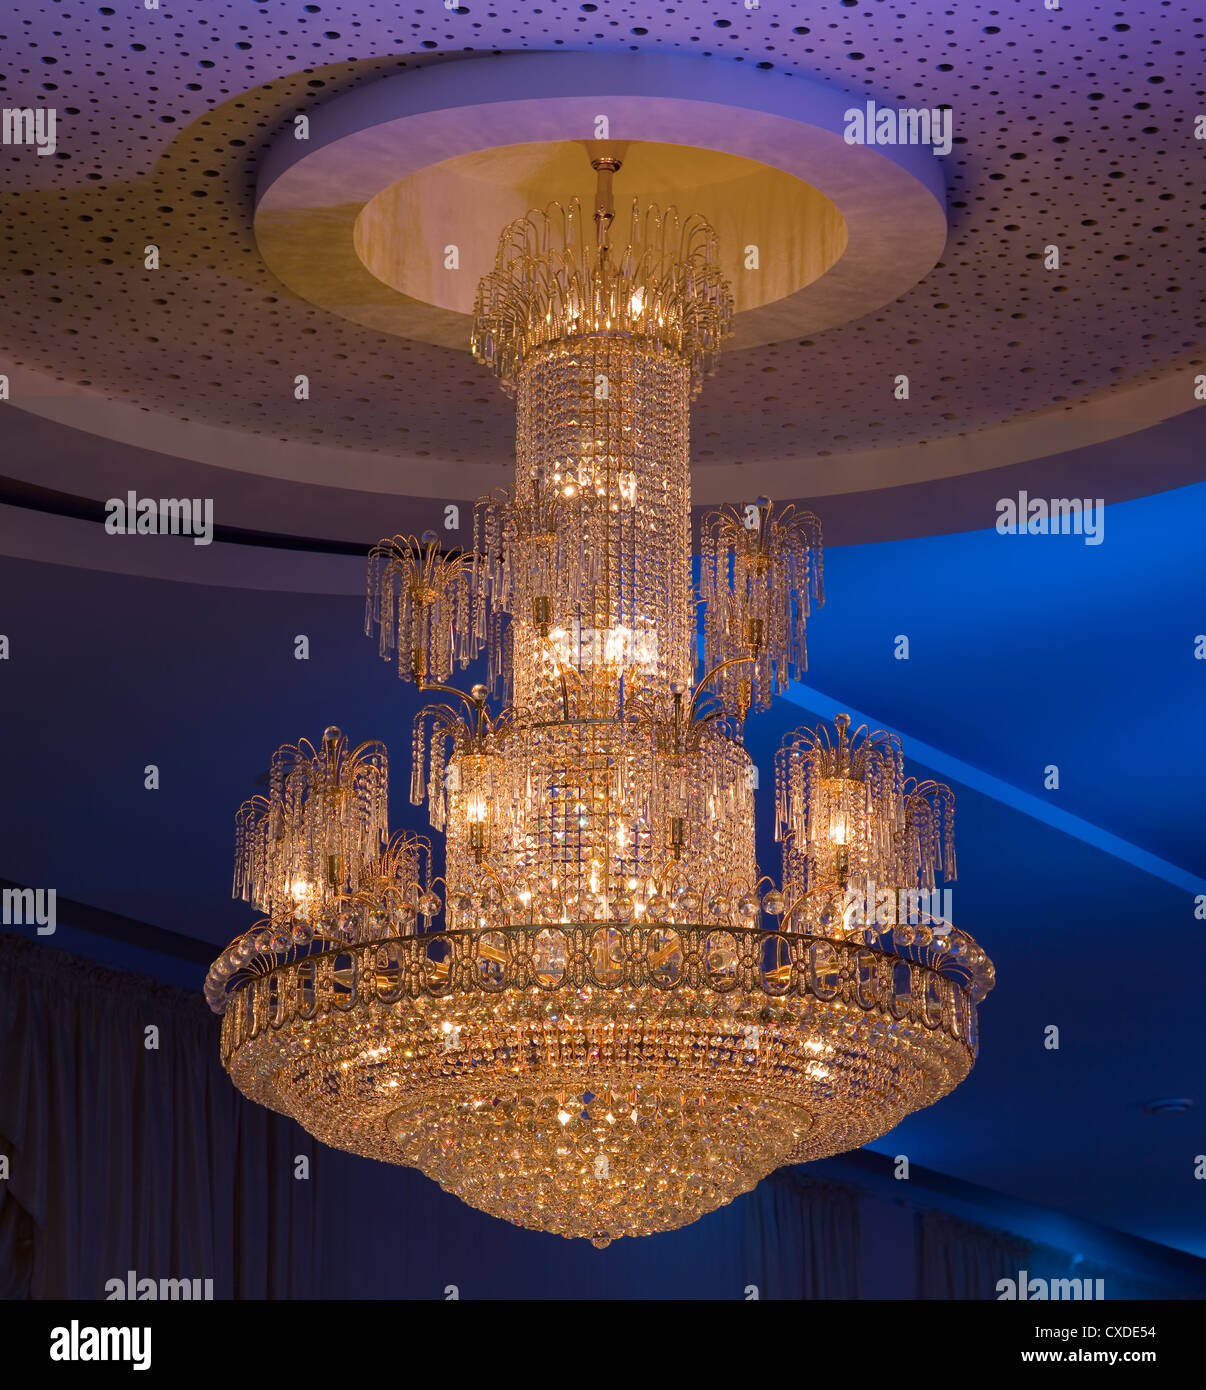 Shimmery Christal Chandelier Hanging from Ceiling Stock Photo